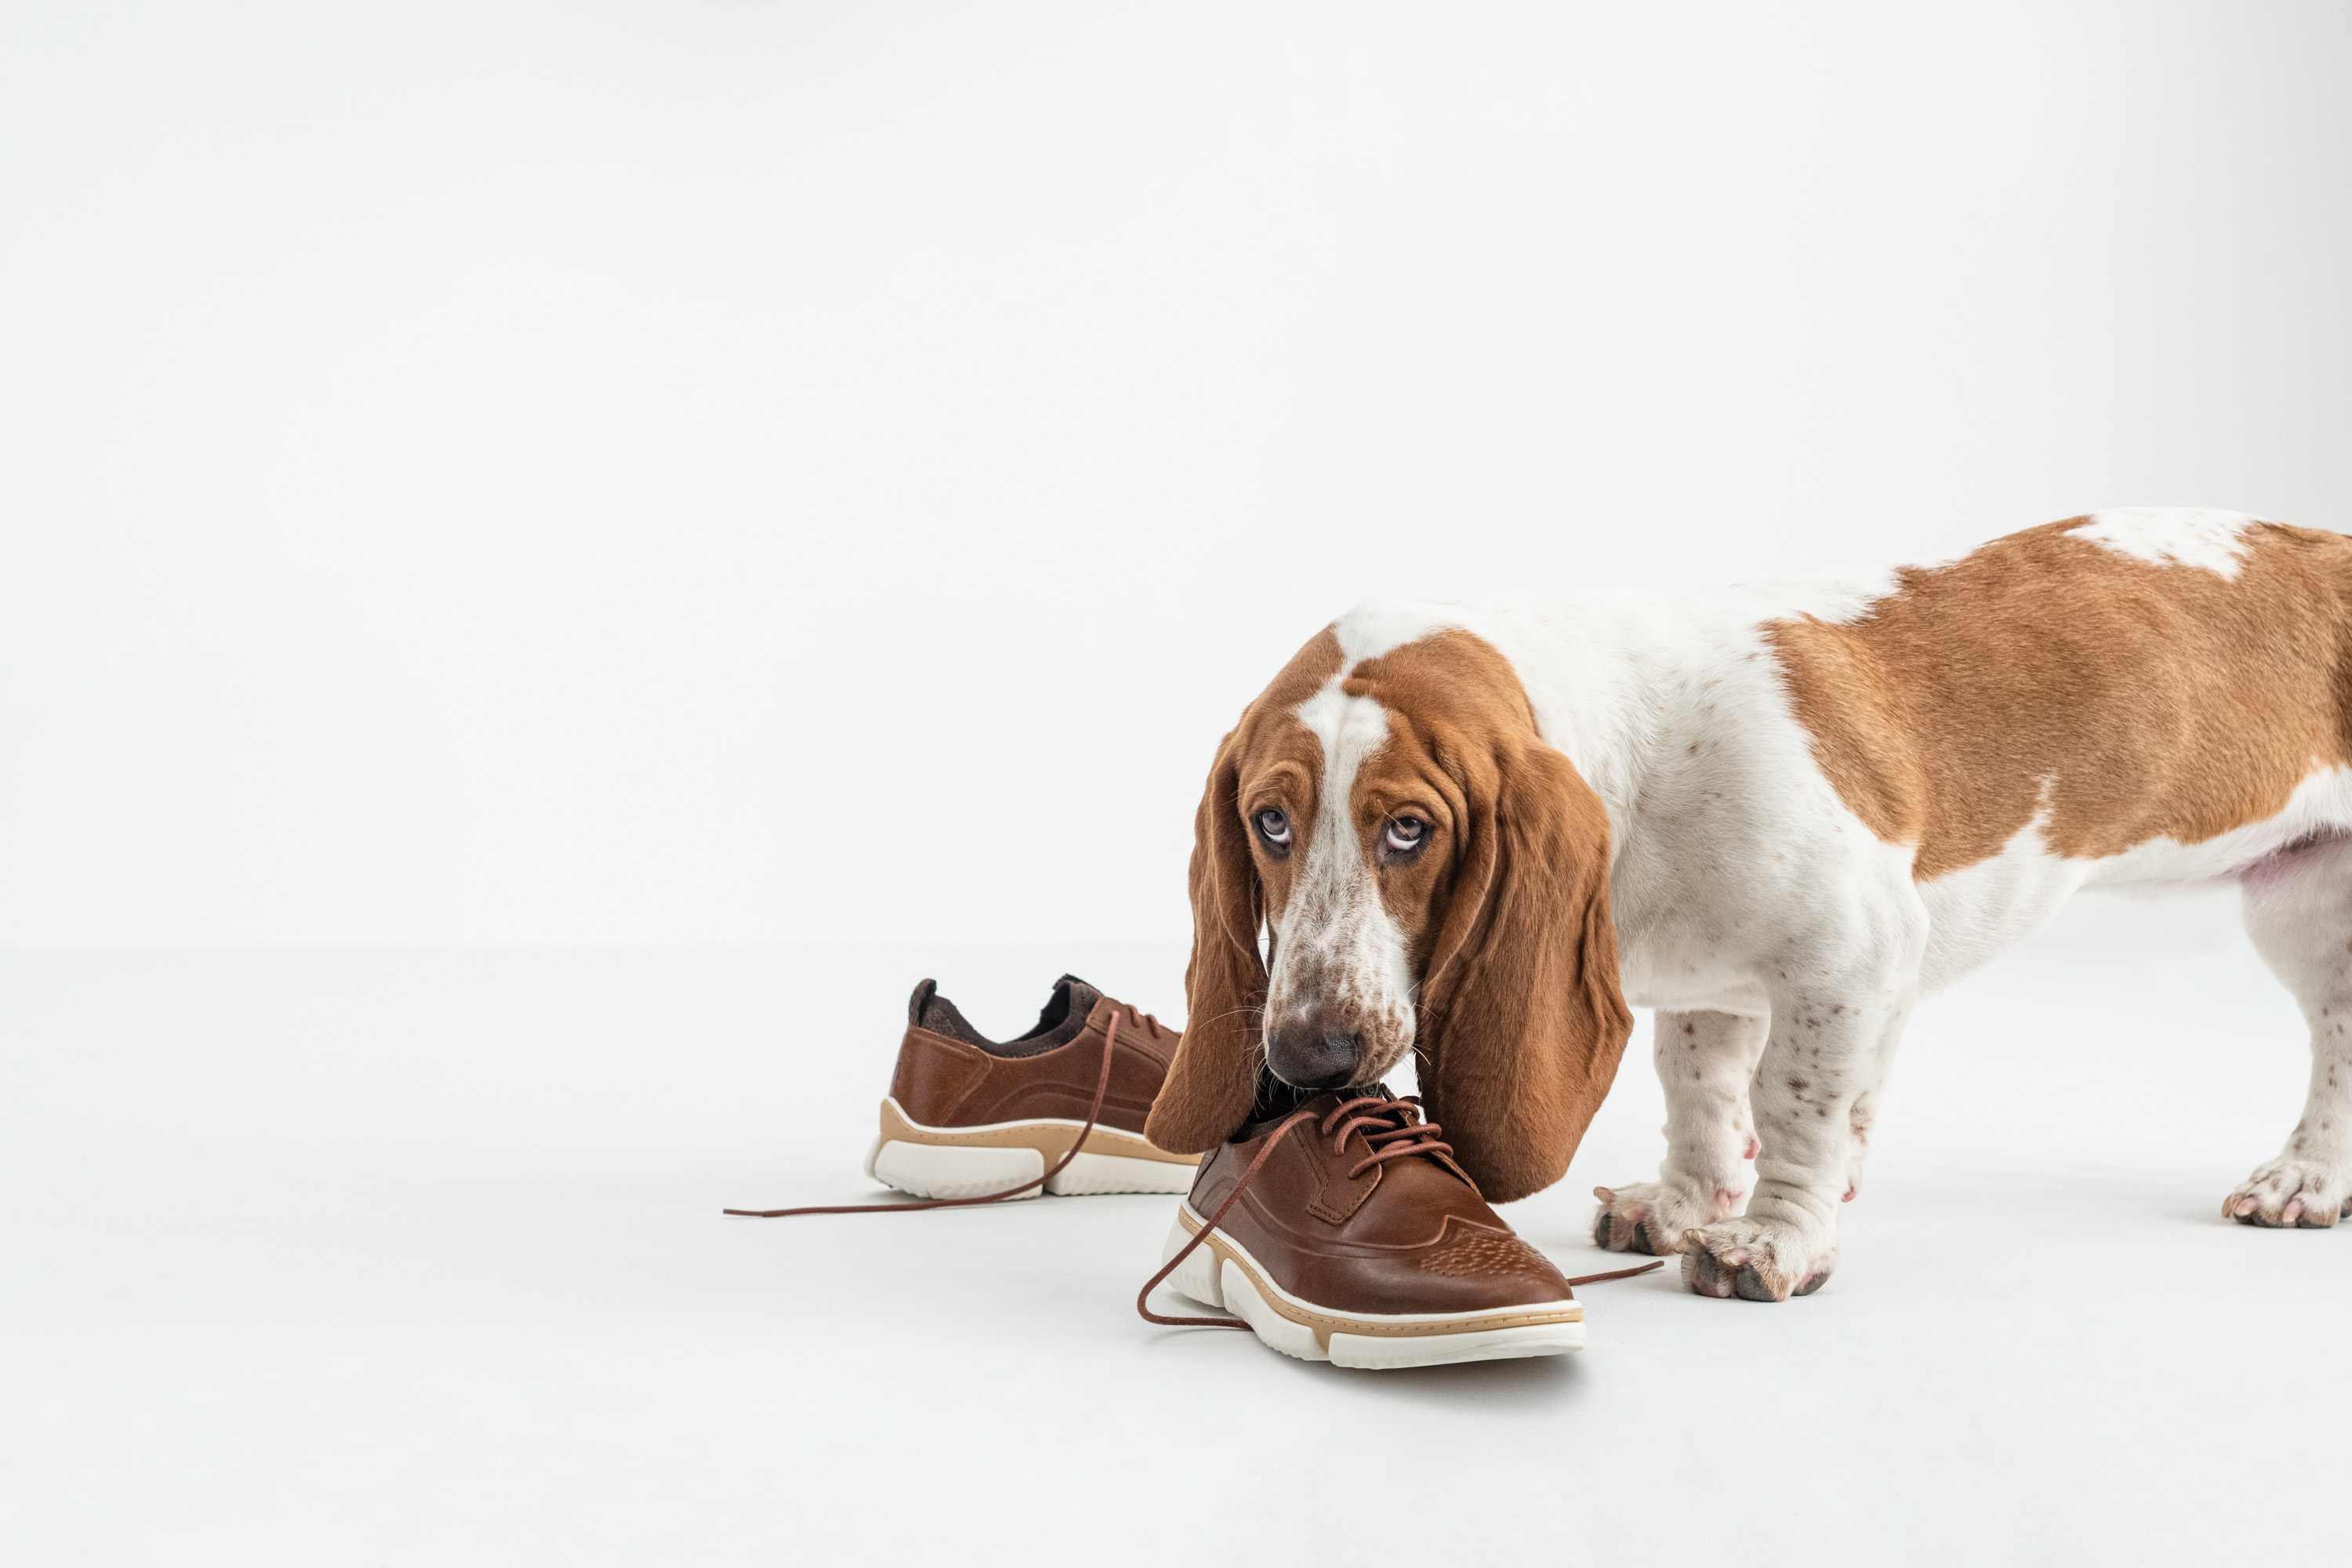 HUSH PUPPIES SHOES